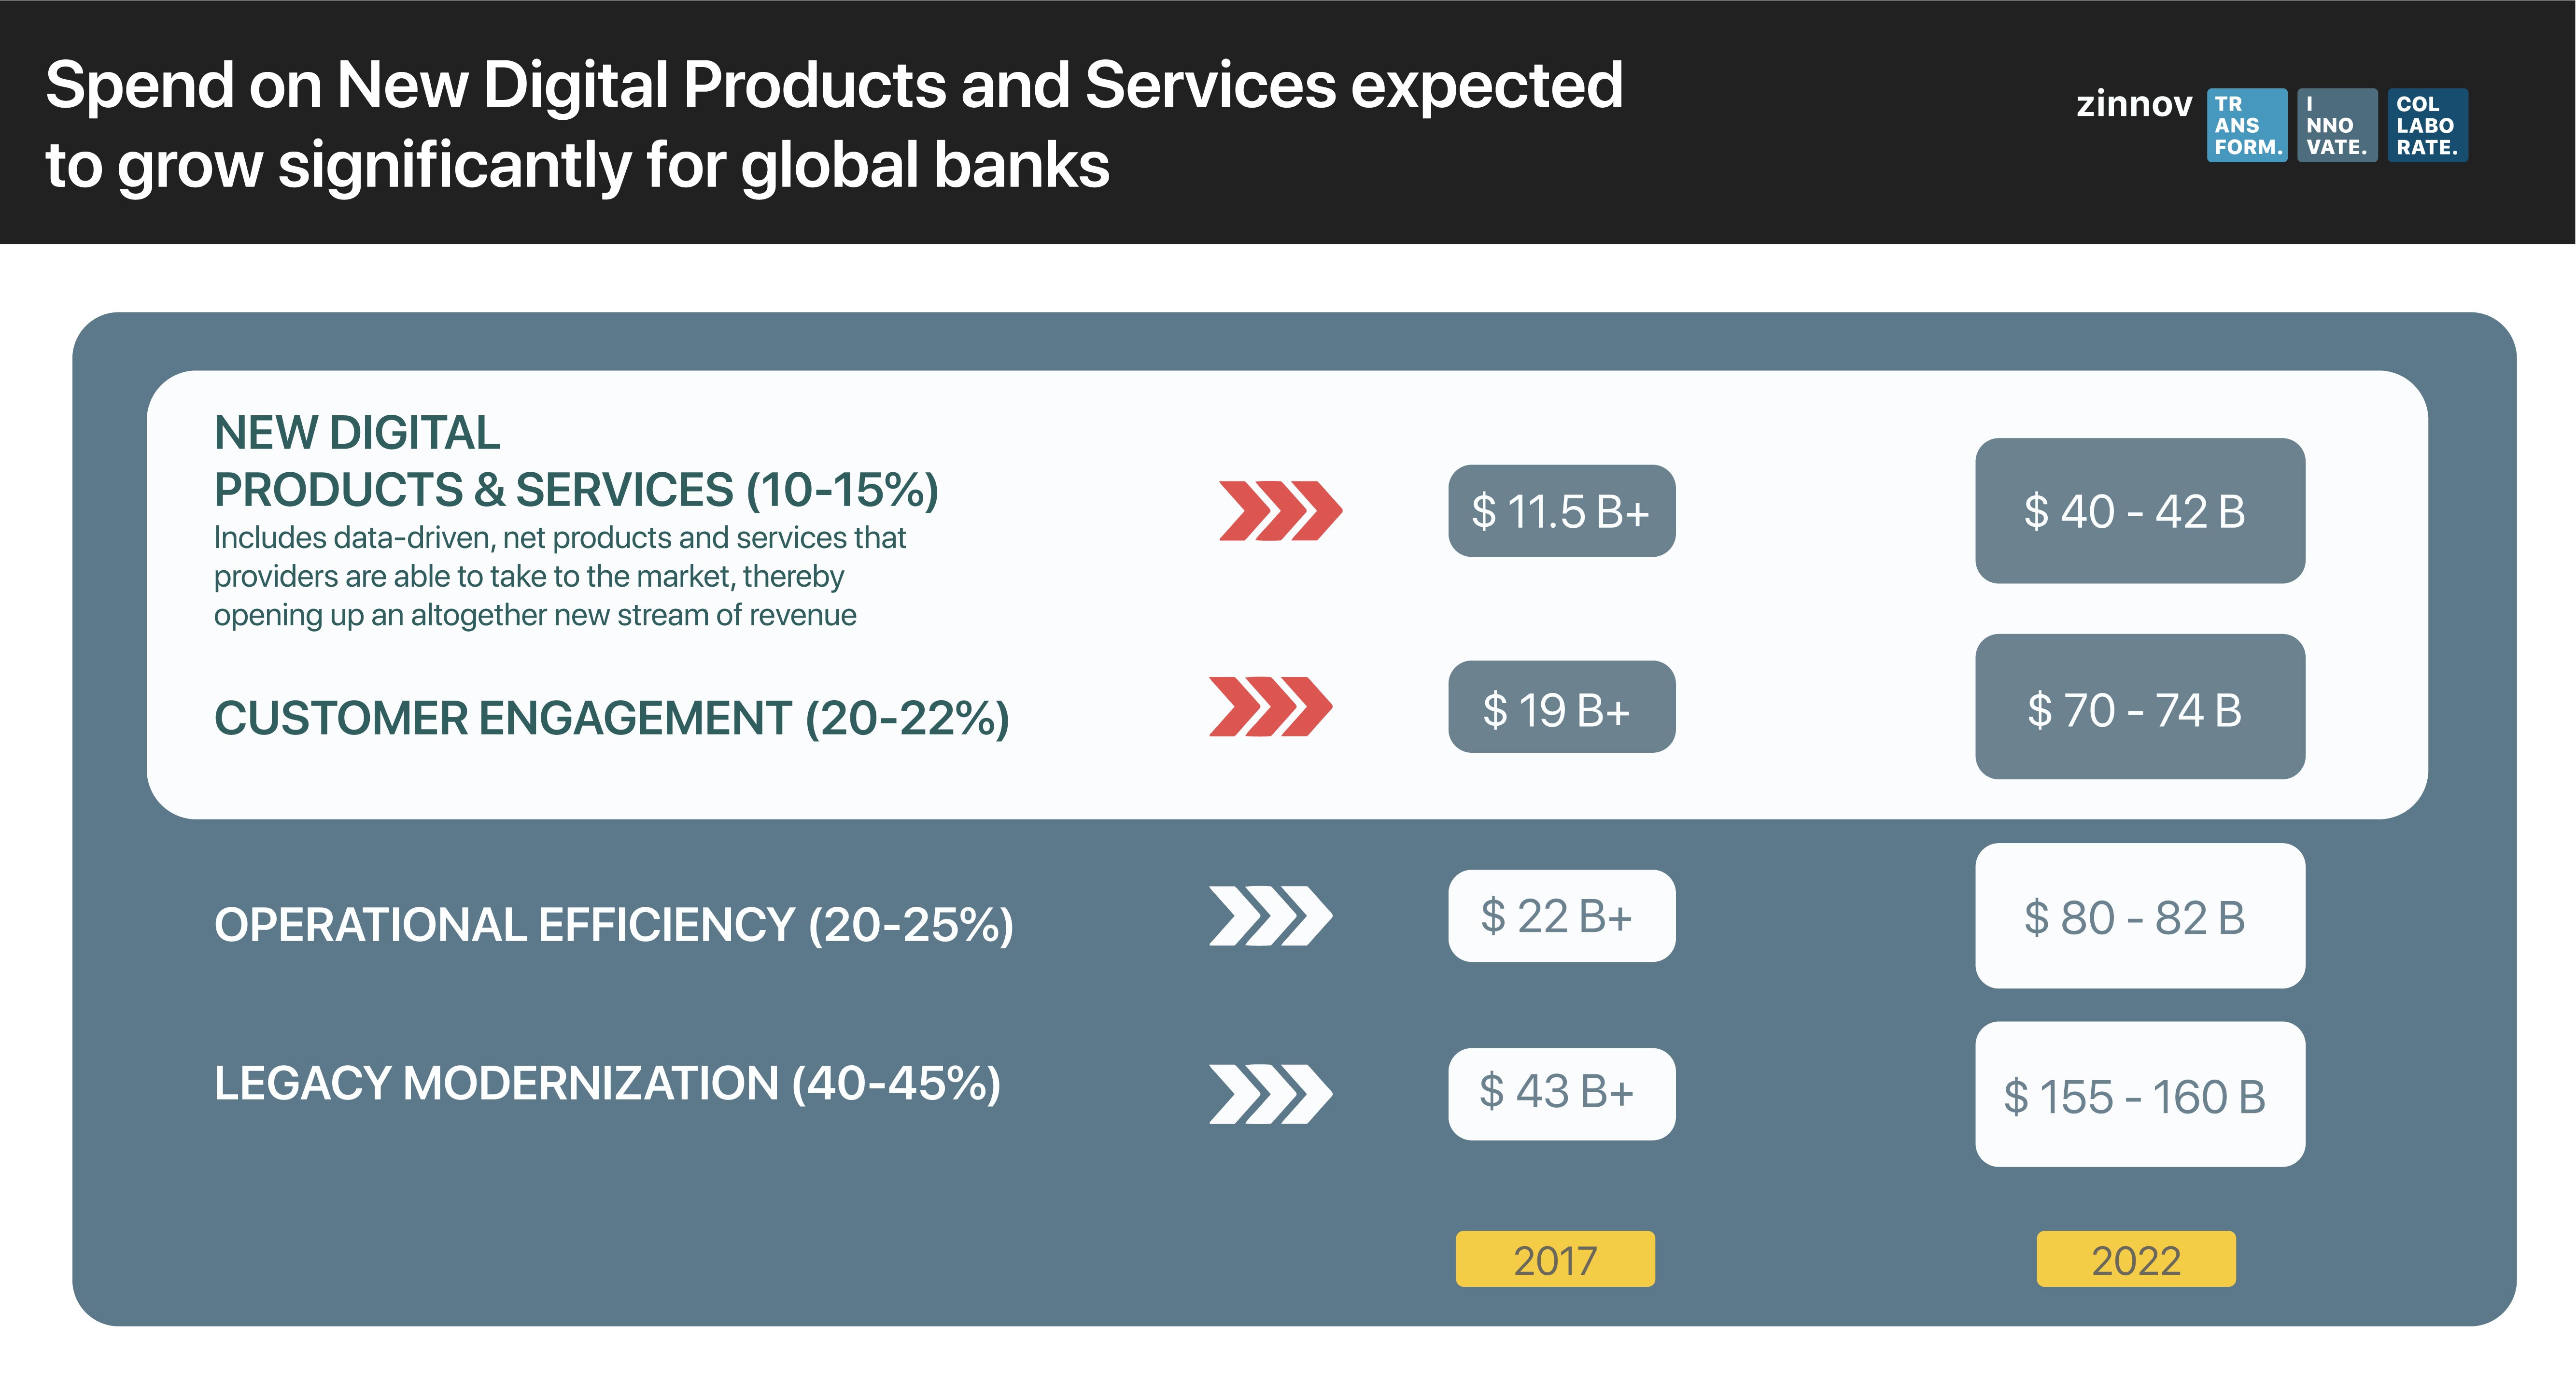 Spend on new digital products and services